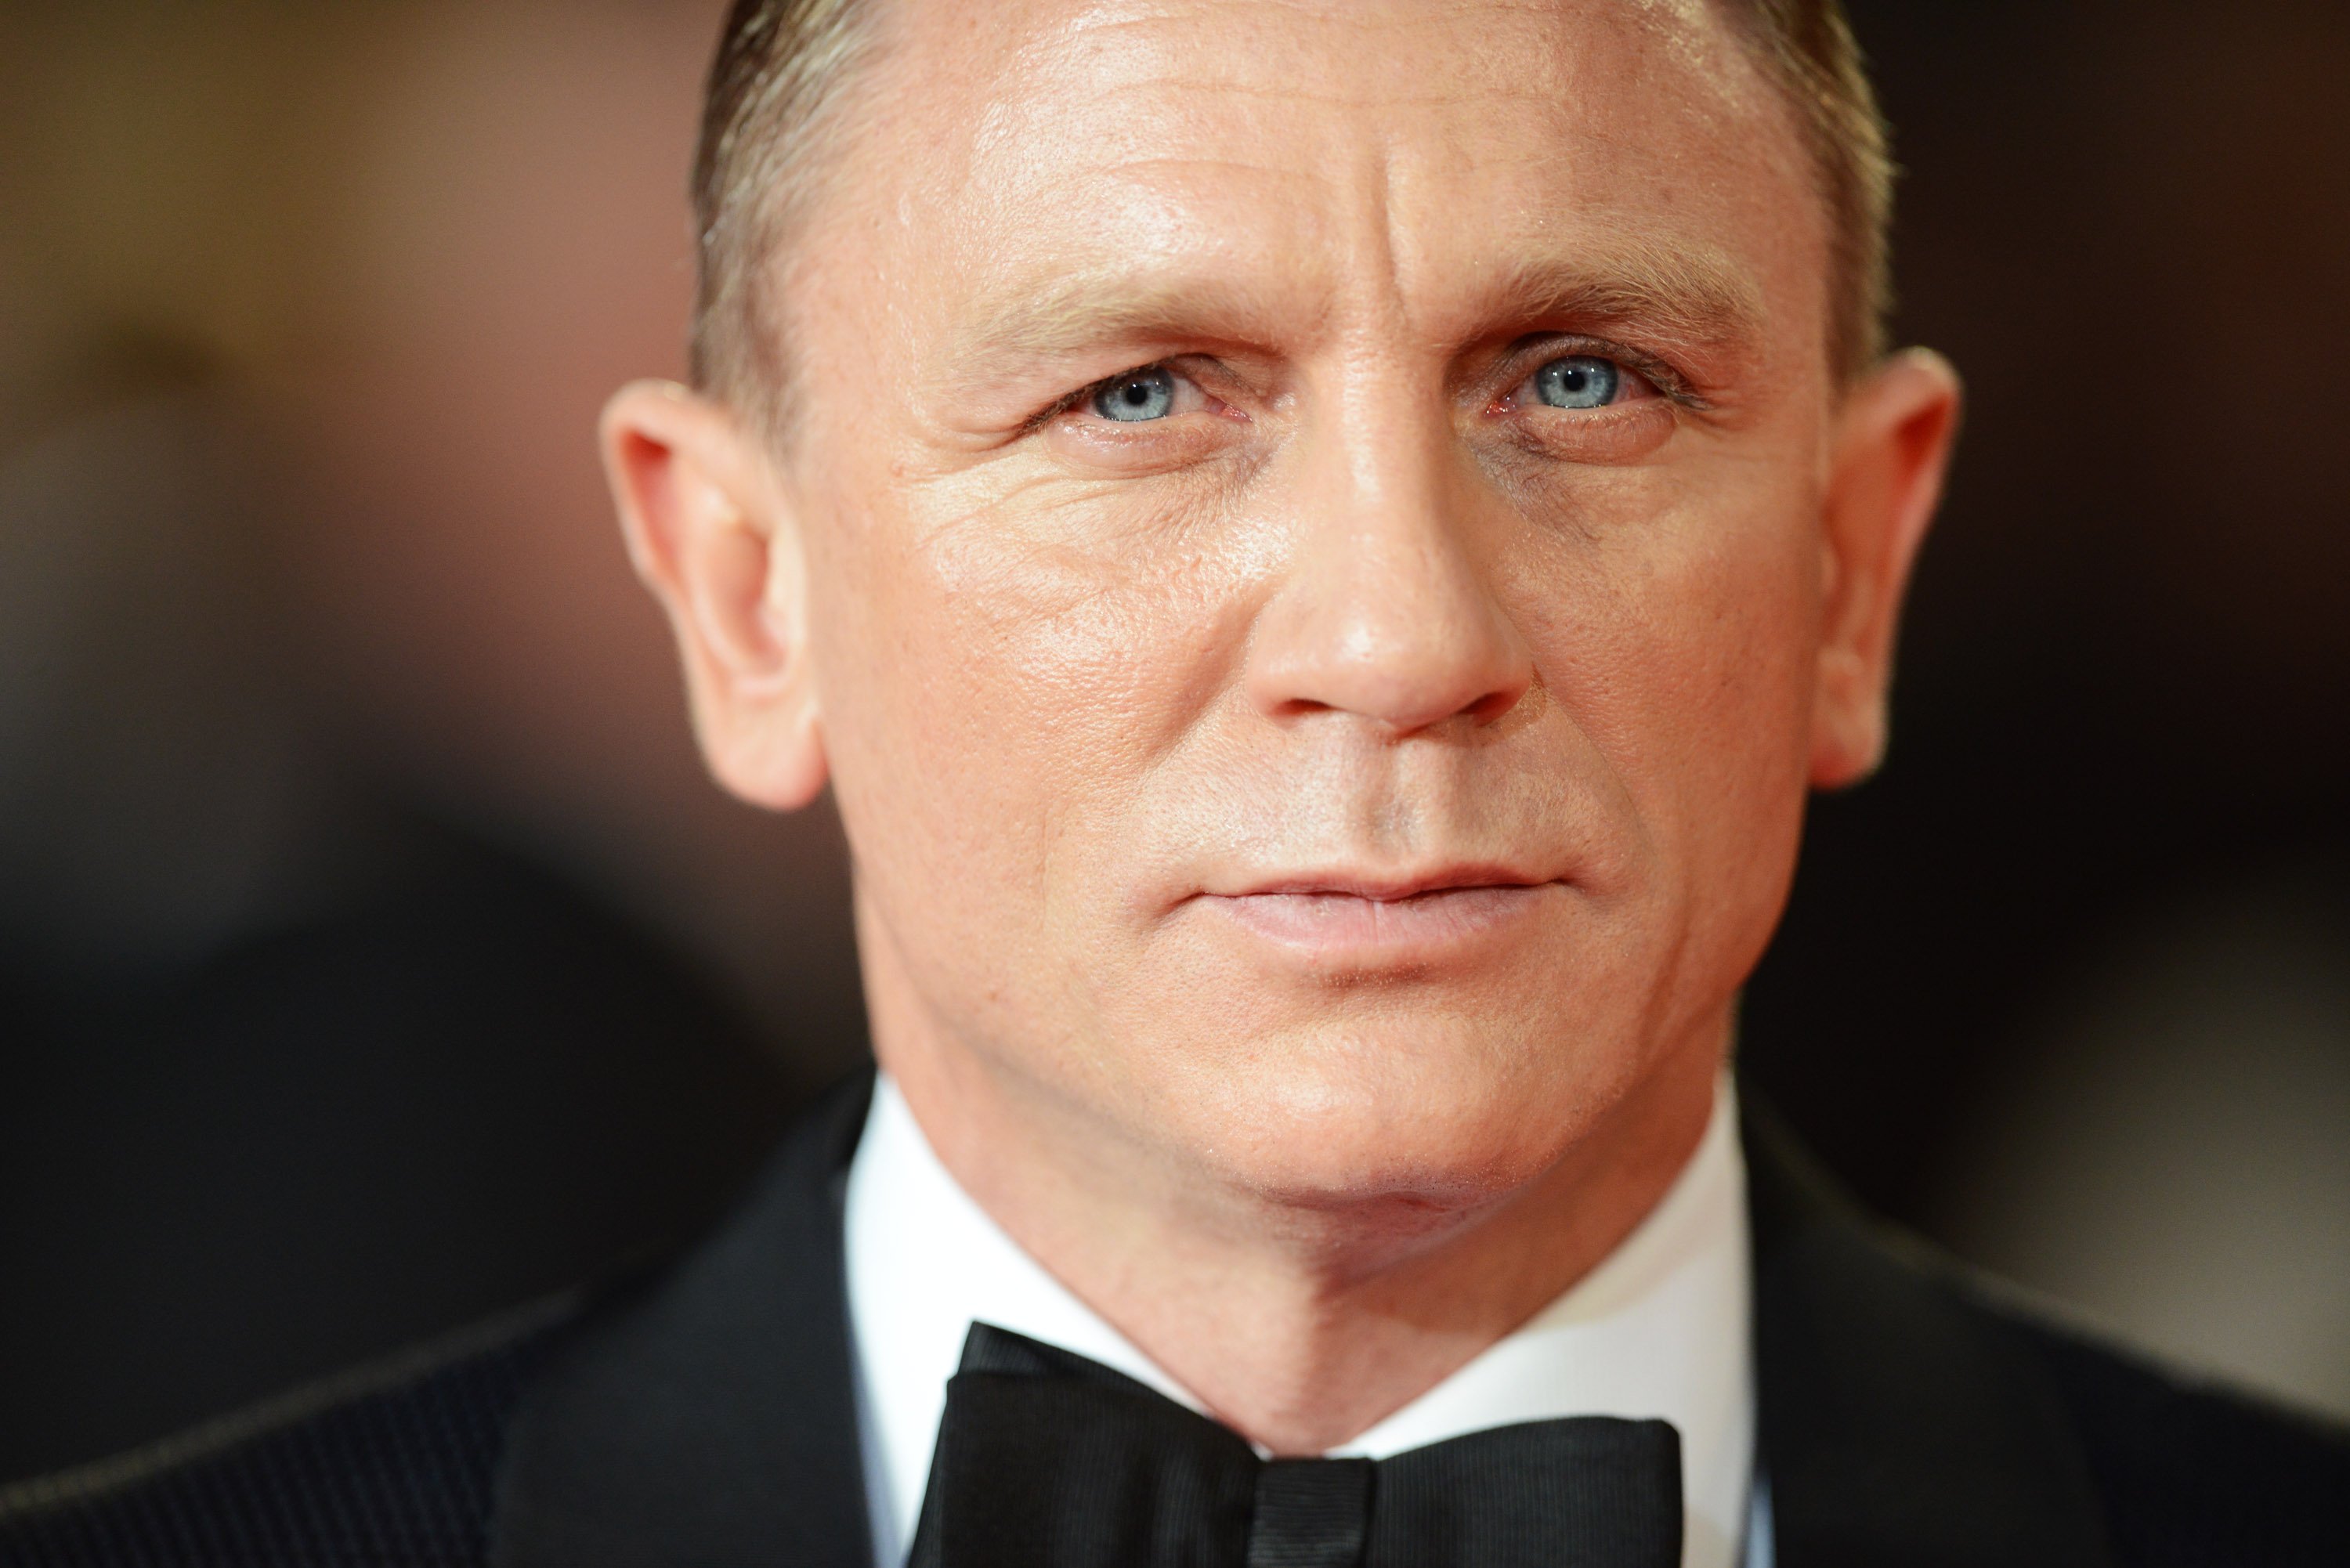 Daniel Craig attends the Royal world premiere of 'Skyfall' on October 23, 2012, in London, England. | Source: Getty Images.